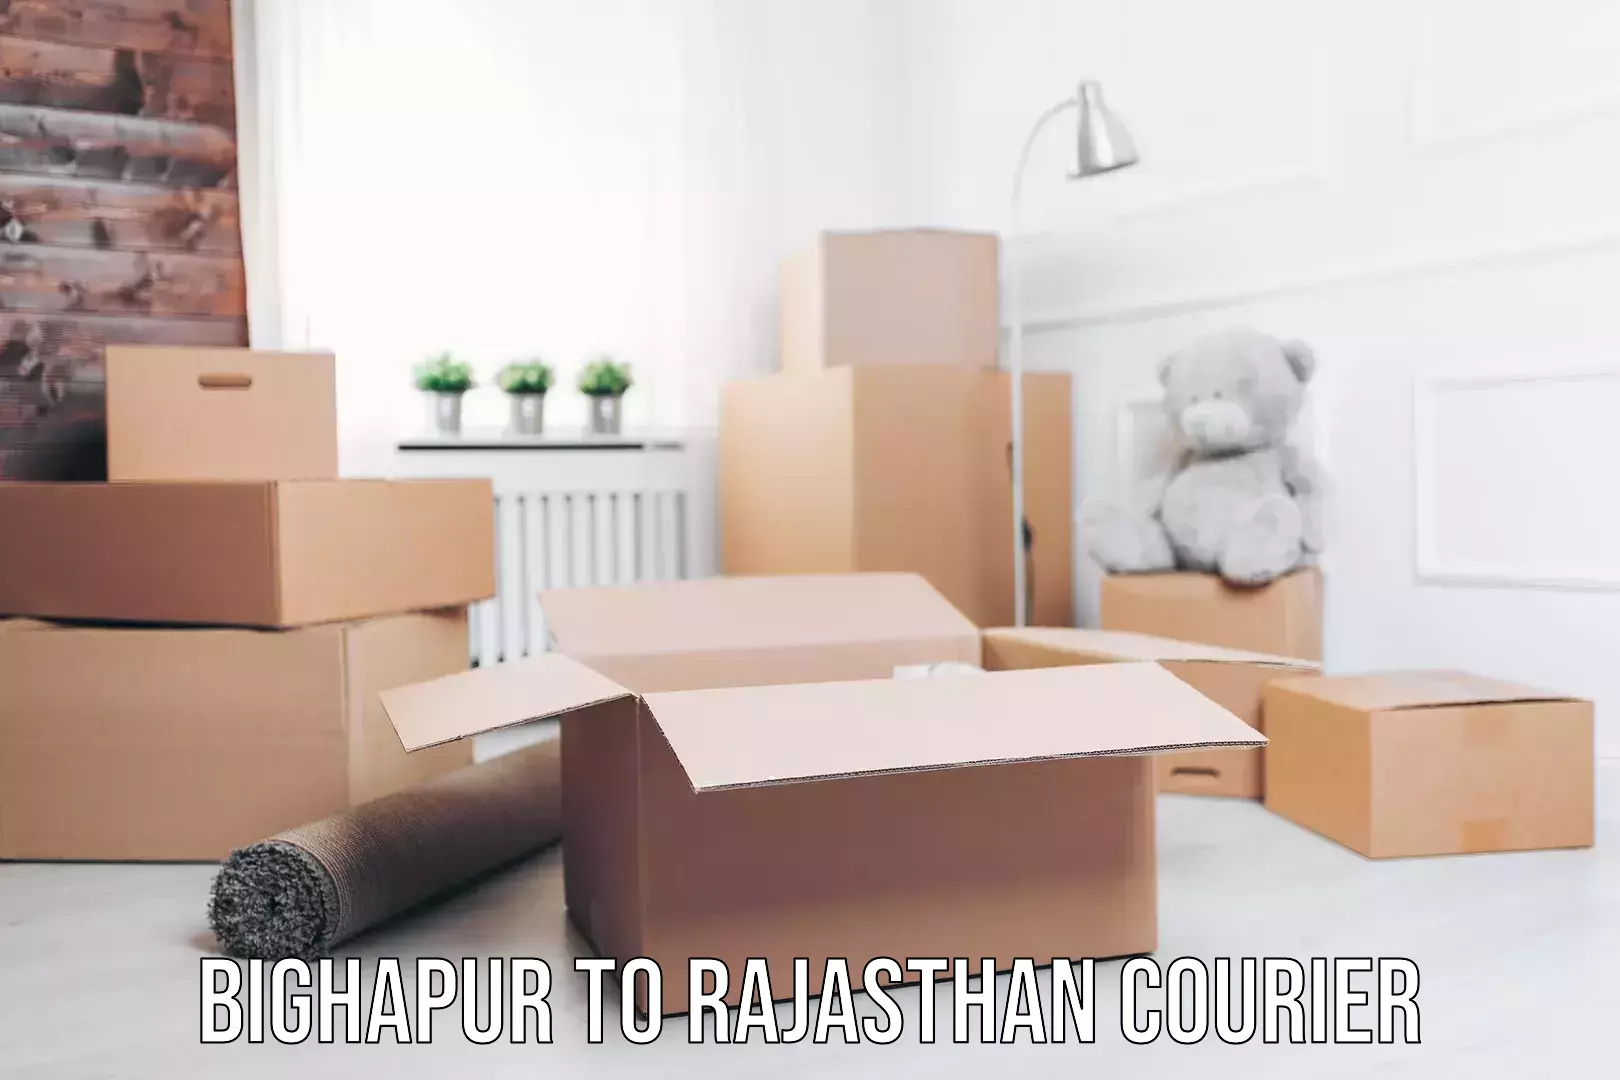 Reliable parcel services Bighapur to Rajasthan